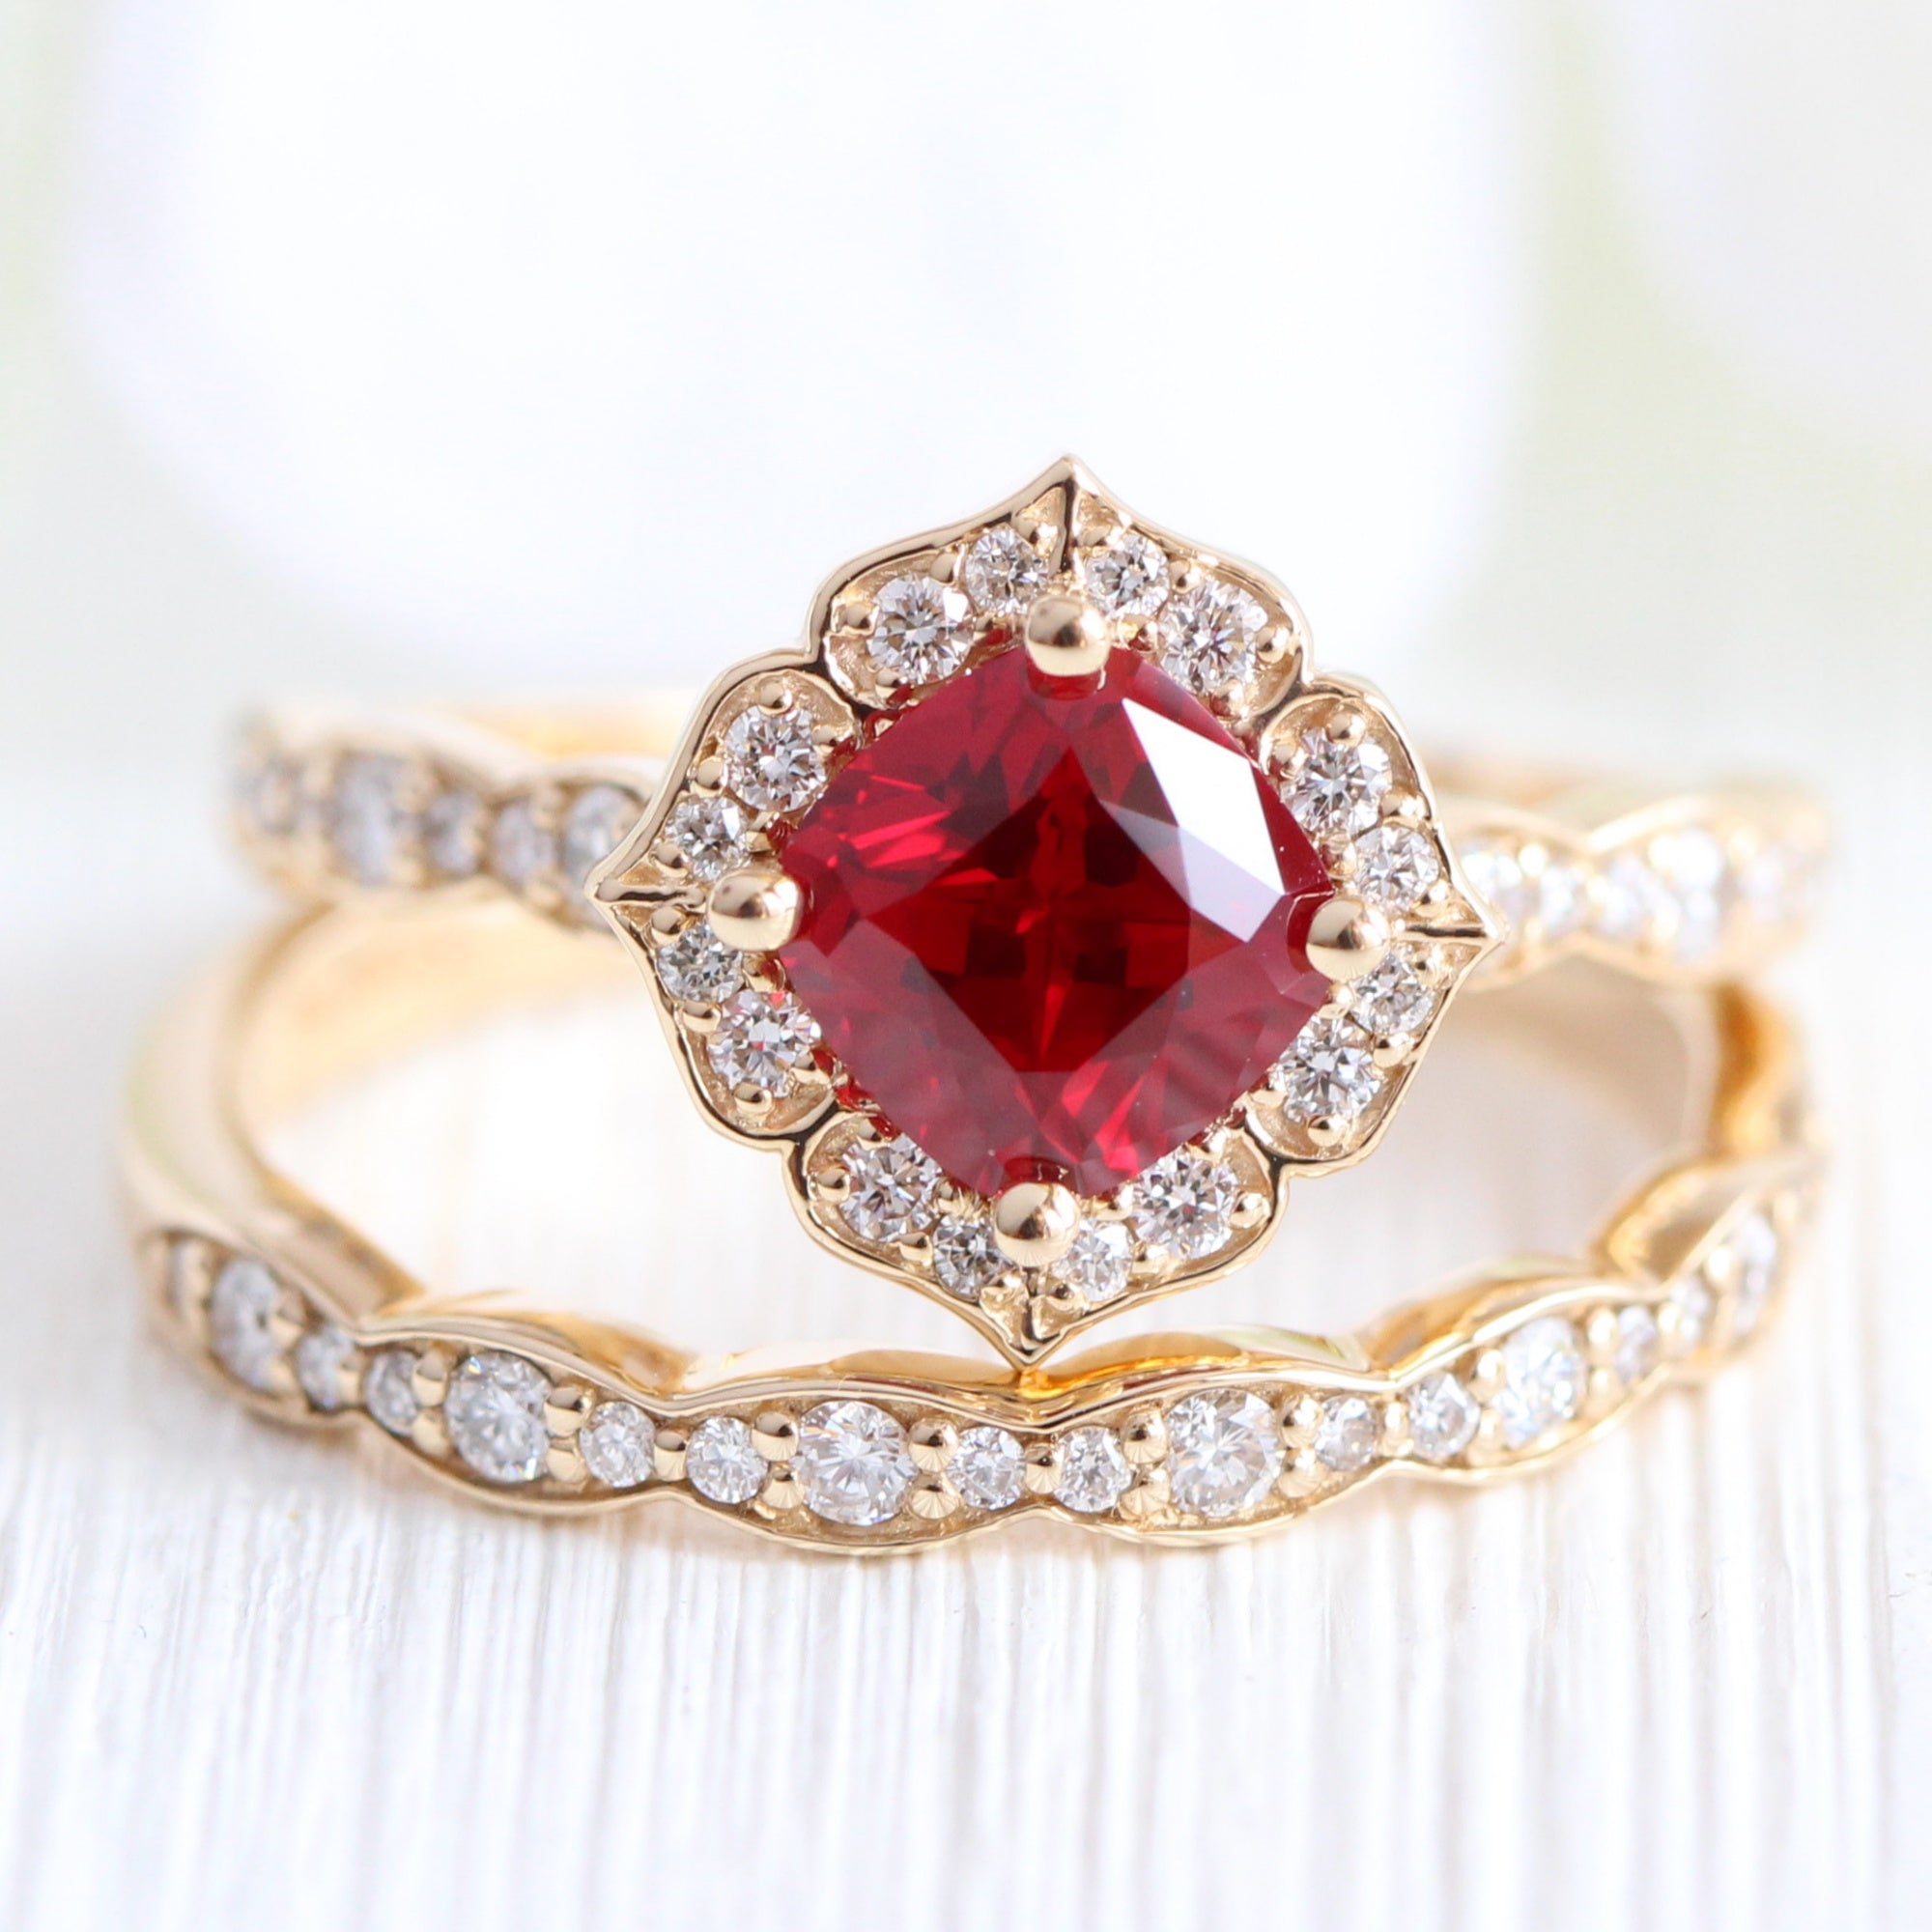 Mini Vintage Floral Cushion Ruby Ring w/ Diamonds in the Scalloped Band